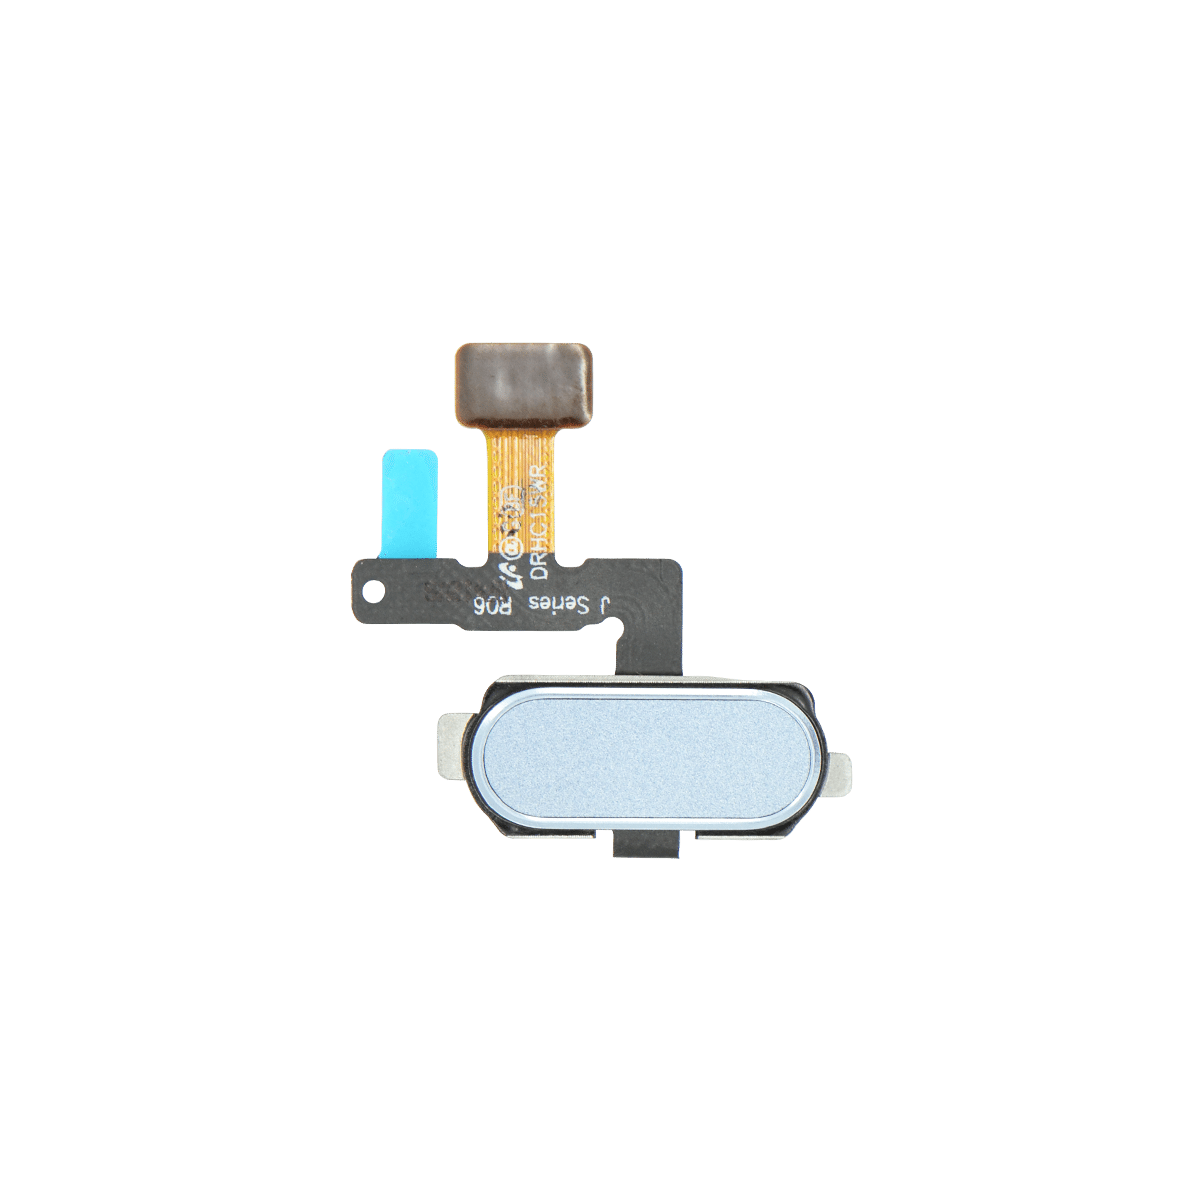 Samsung Galaxy J7 Pro (2017) Home Button Touch ID Assembly